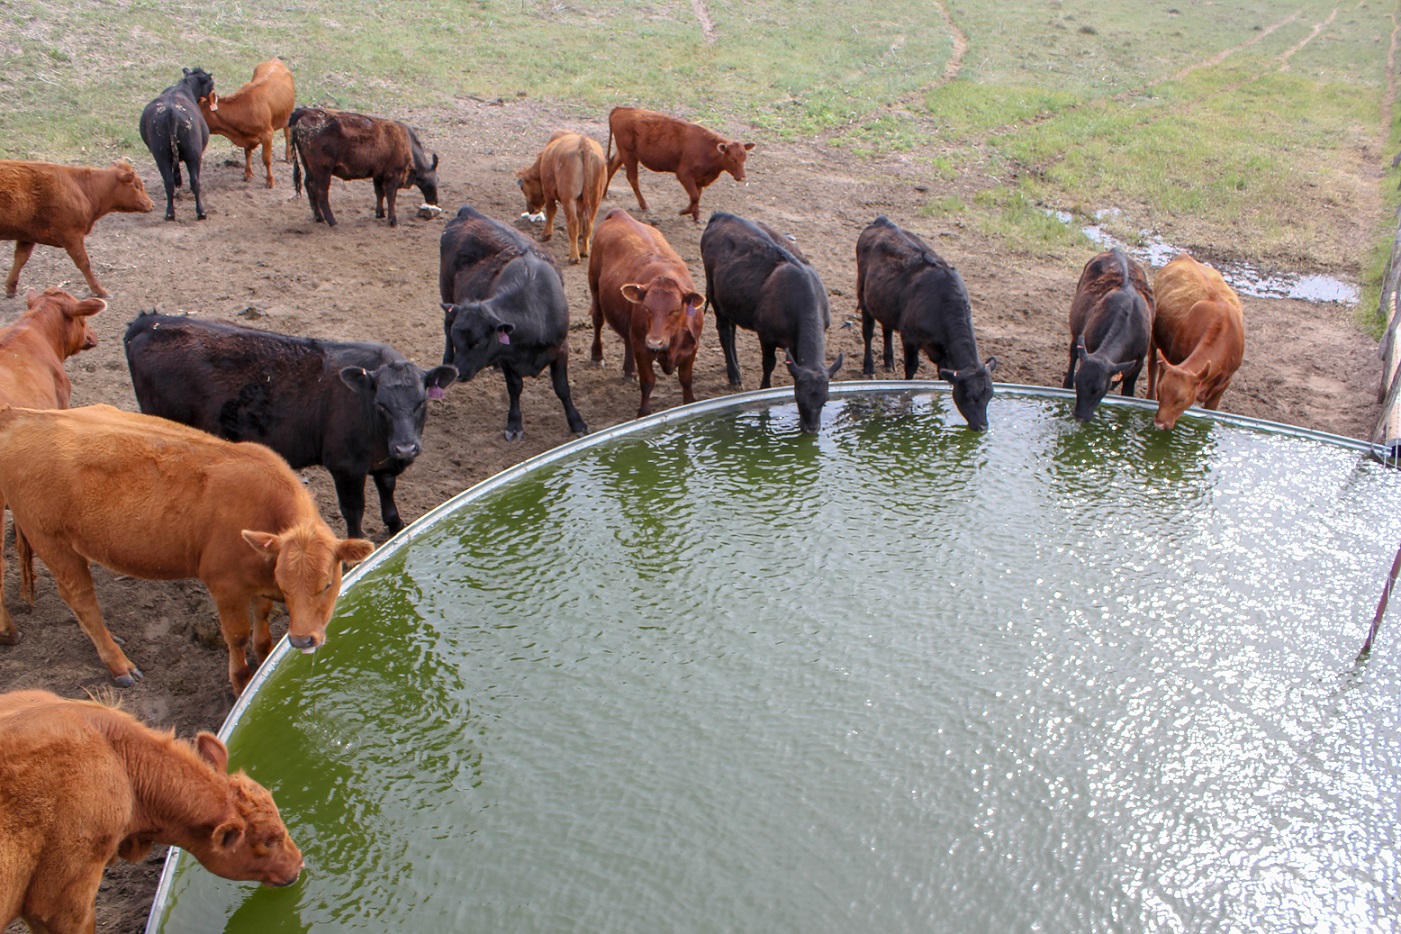 Being able to quickly identify if a problem is occurring with a water source gives producers the opportunity to respond rapidly to correct any issues. Photo credit Troy Walz.